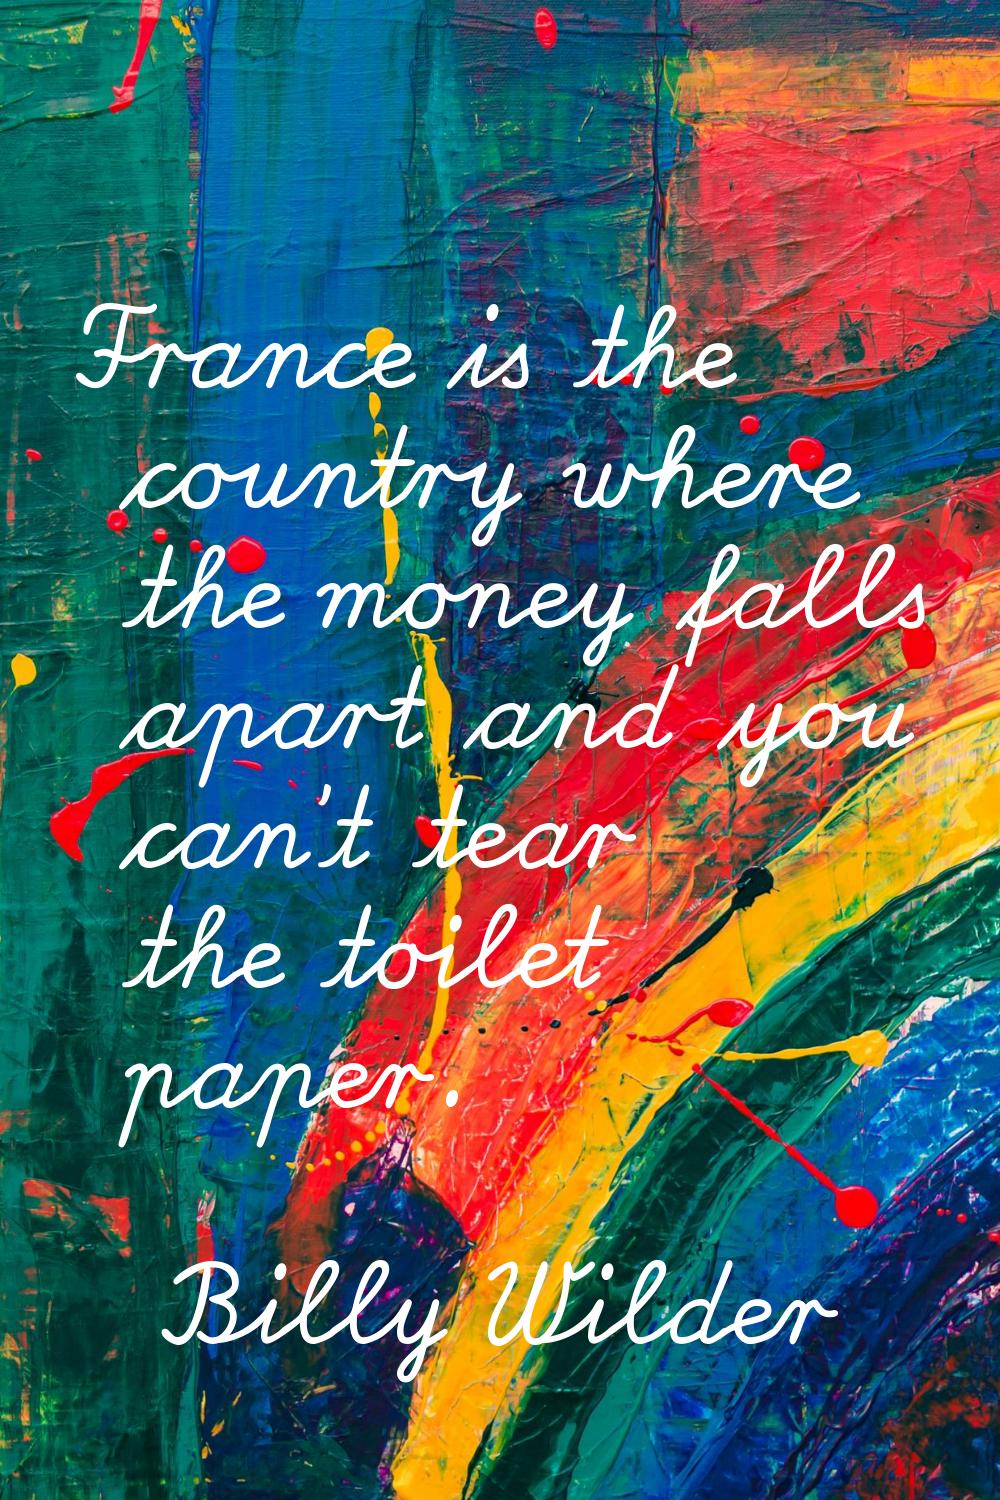 France is the country where the money falls apart and you can't tear the toilet paper.